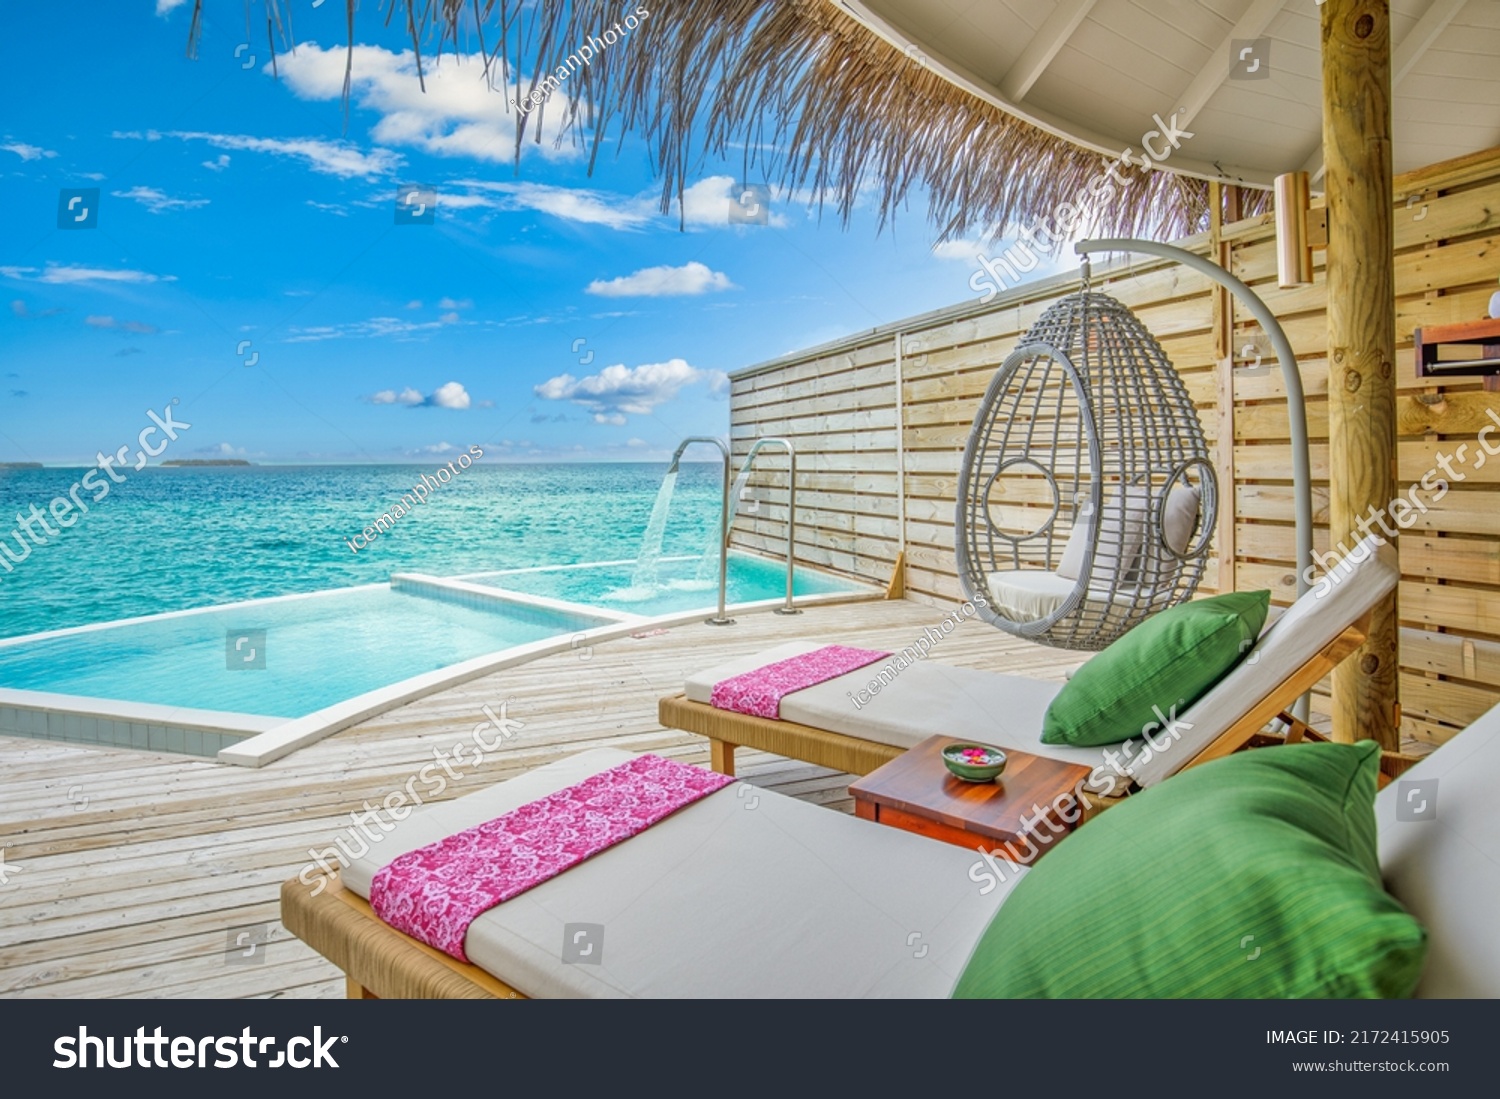 Fantastic over water villa, terrace view with sun beds chairs under umbrella, luxury pool hotel with stunning ocean view. Beautiful spa or wellness concept, recreational vacation resort tranquil area #2172415905